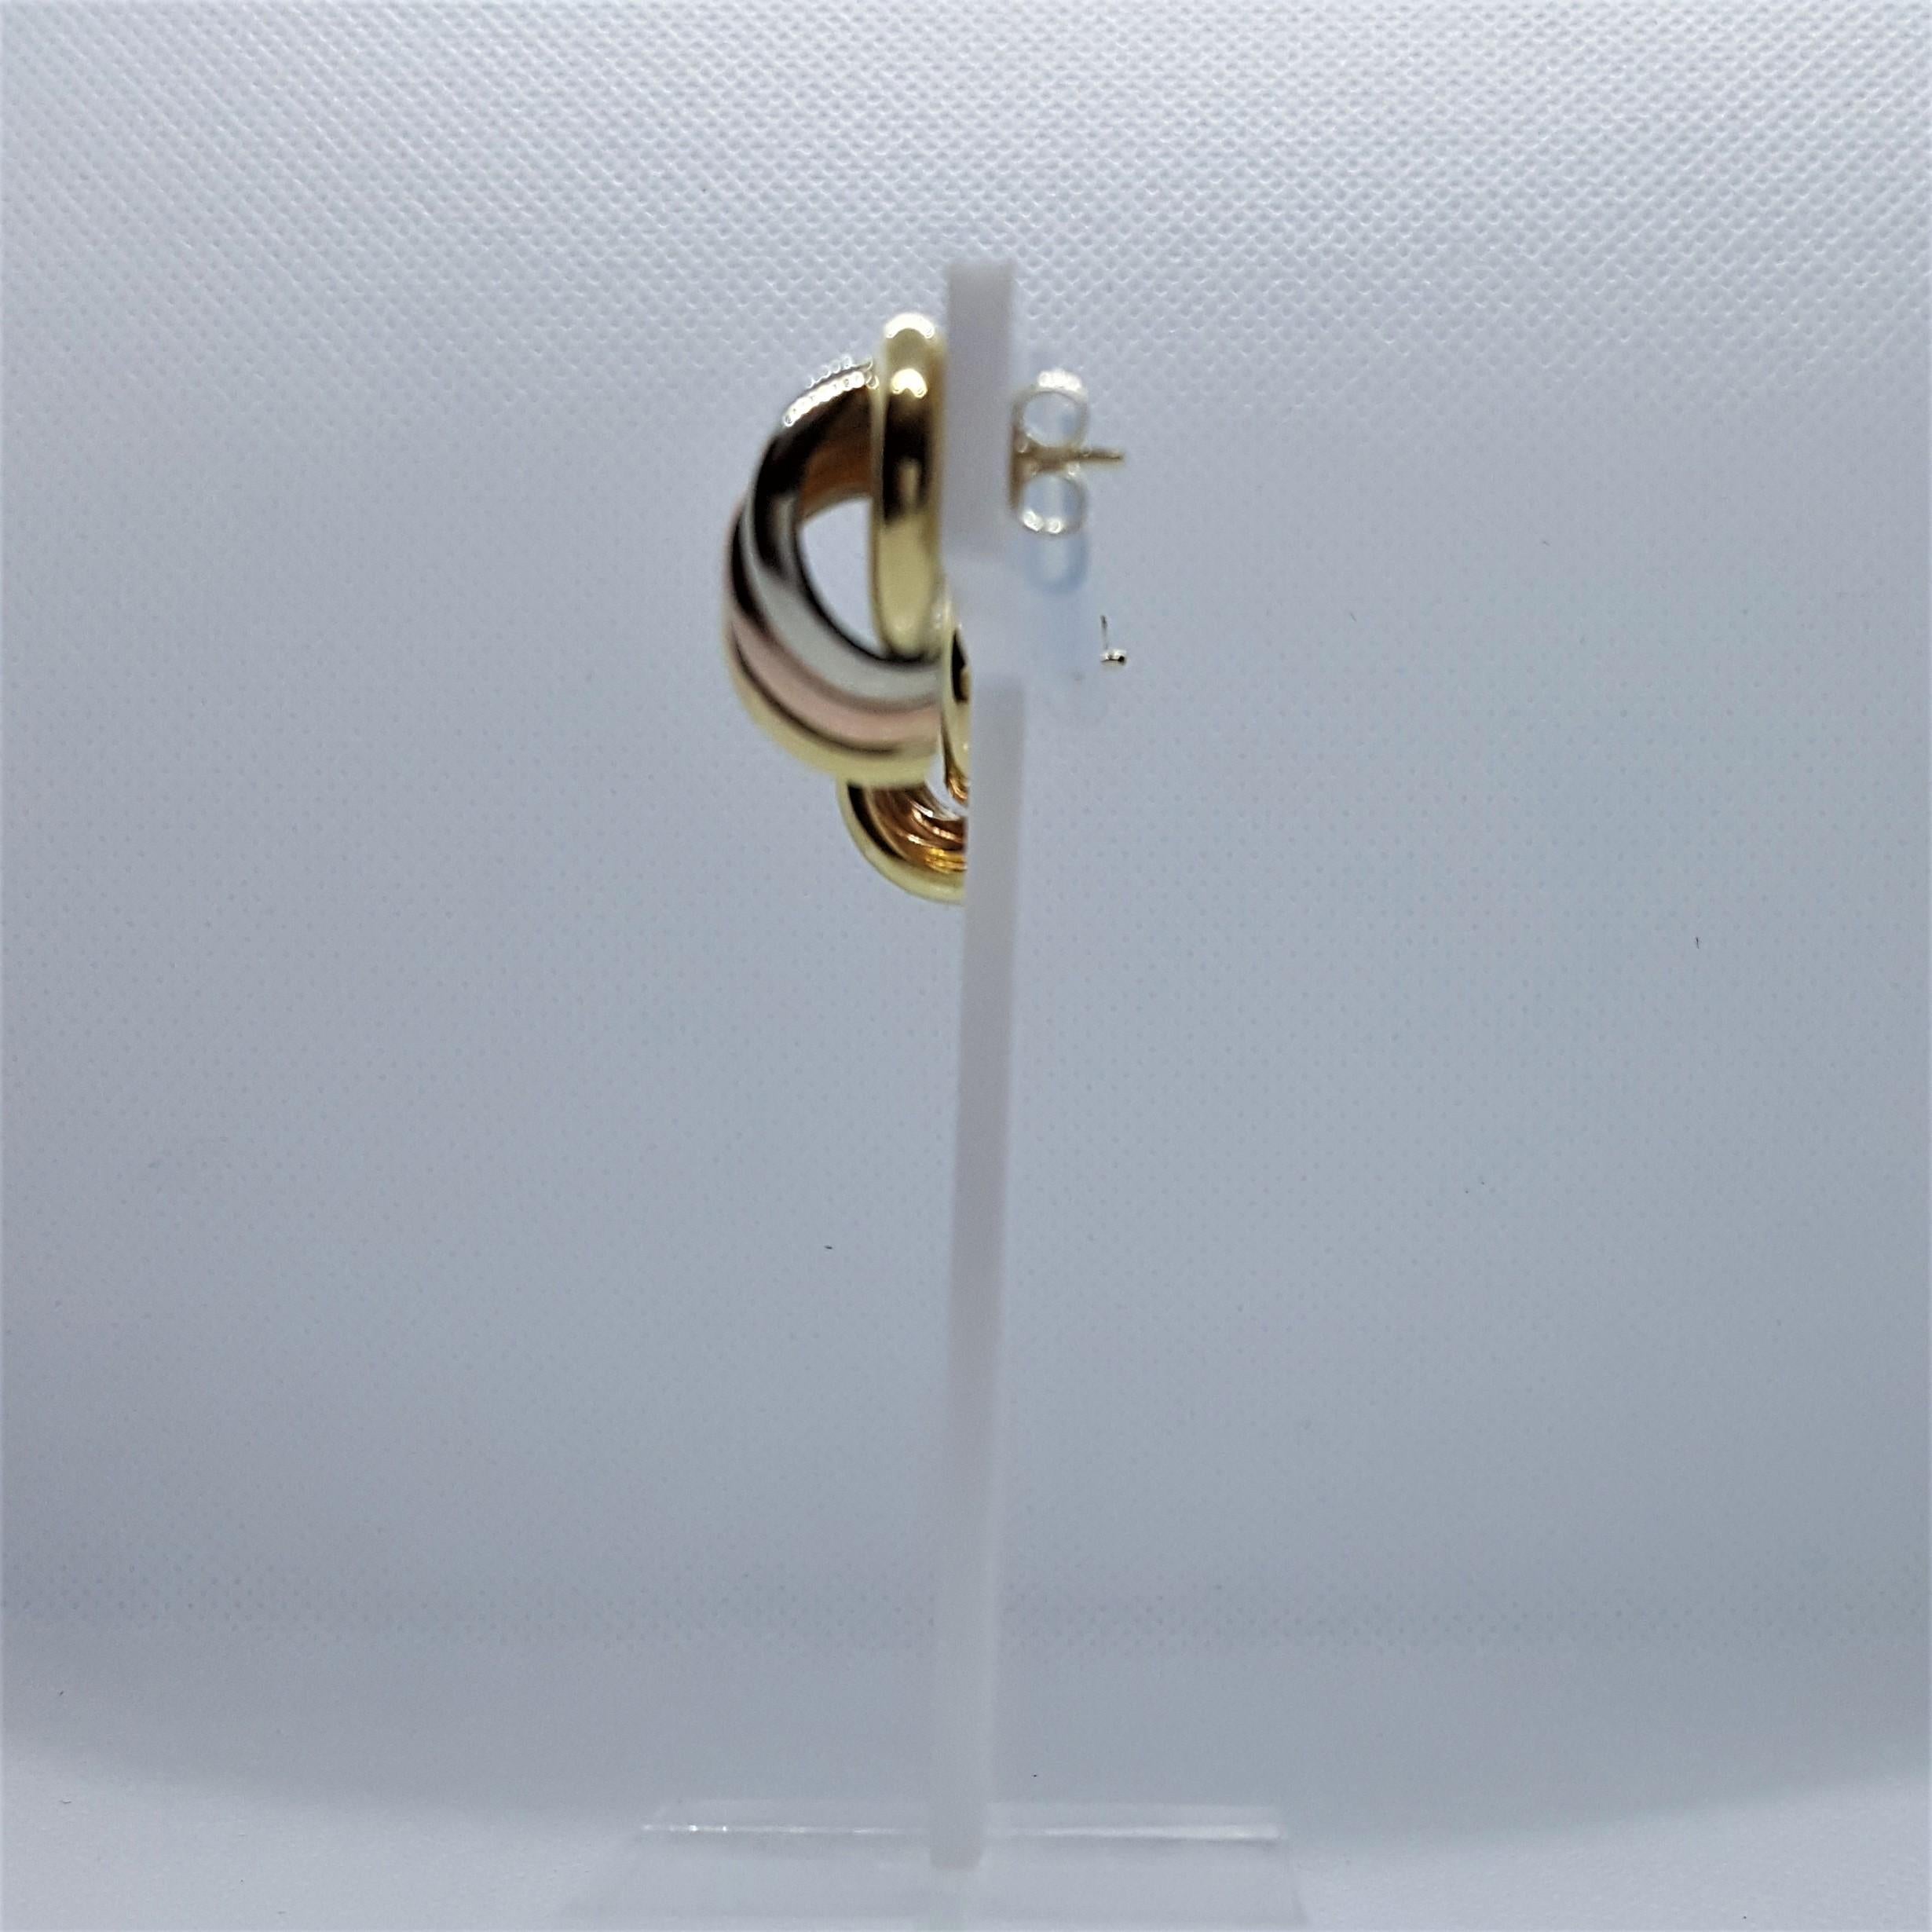 Versatile 18kt tri-color gold knot hoop earrings that are white, yellow, and rose-colored gold. These earrings and in very good condition and have been tested at 18kt yellow gold, however the backings are 14k yellow gold. Please let us know if you